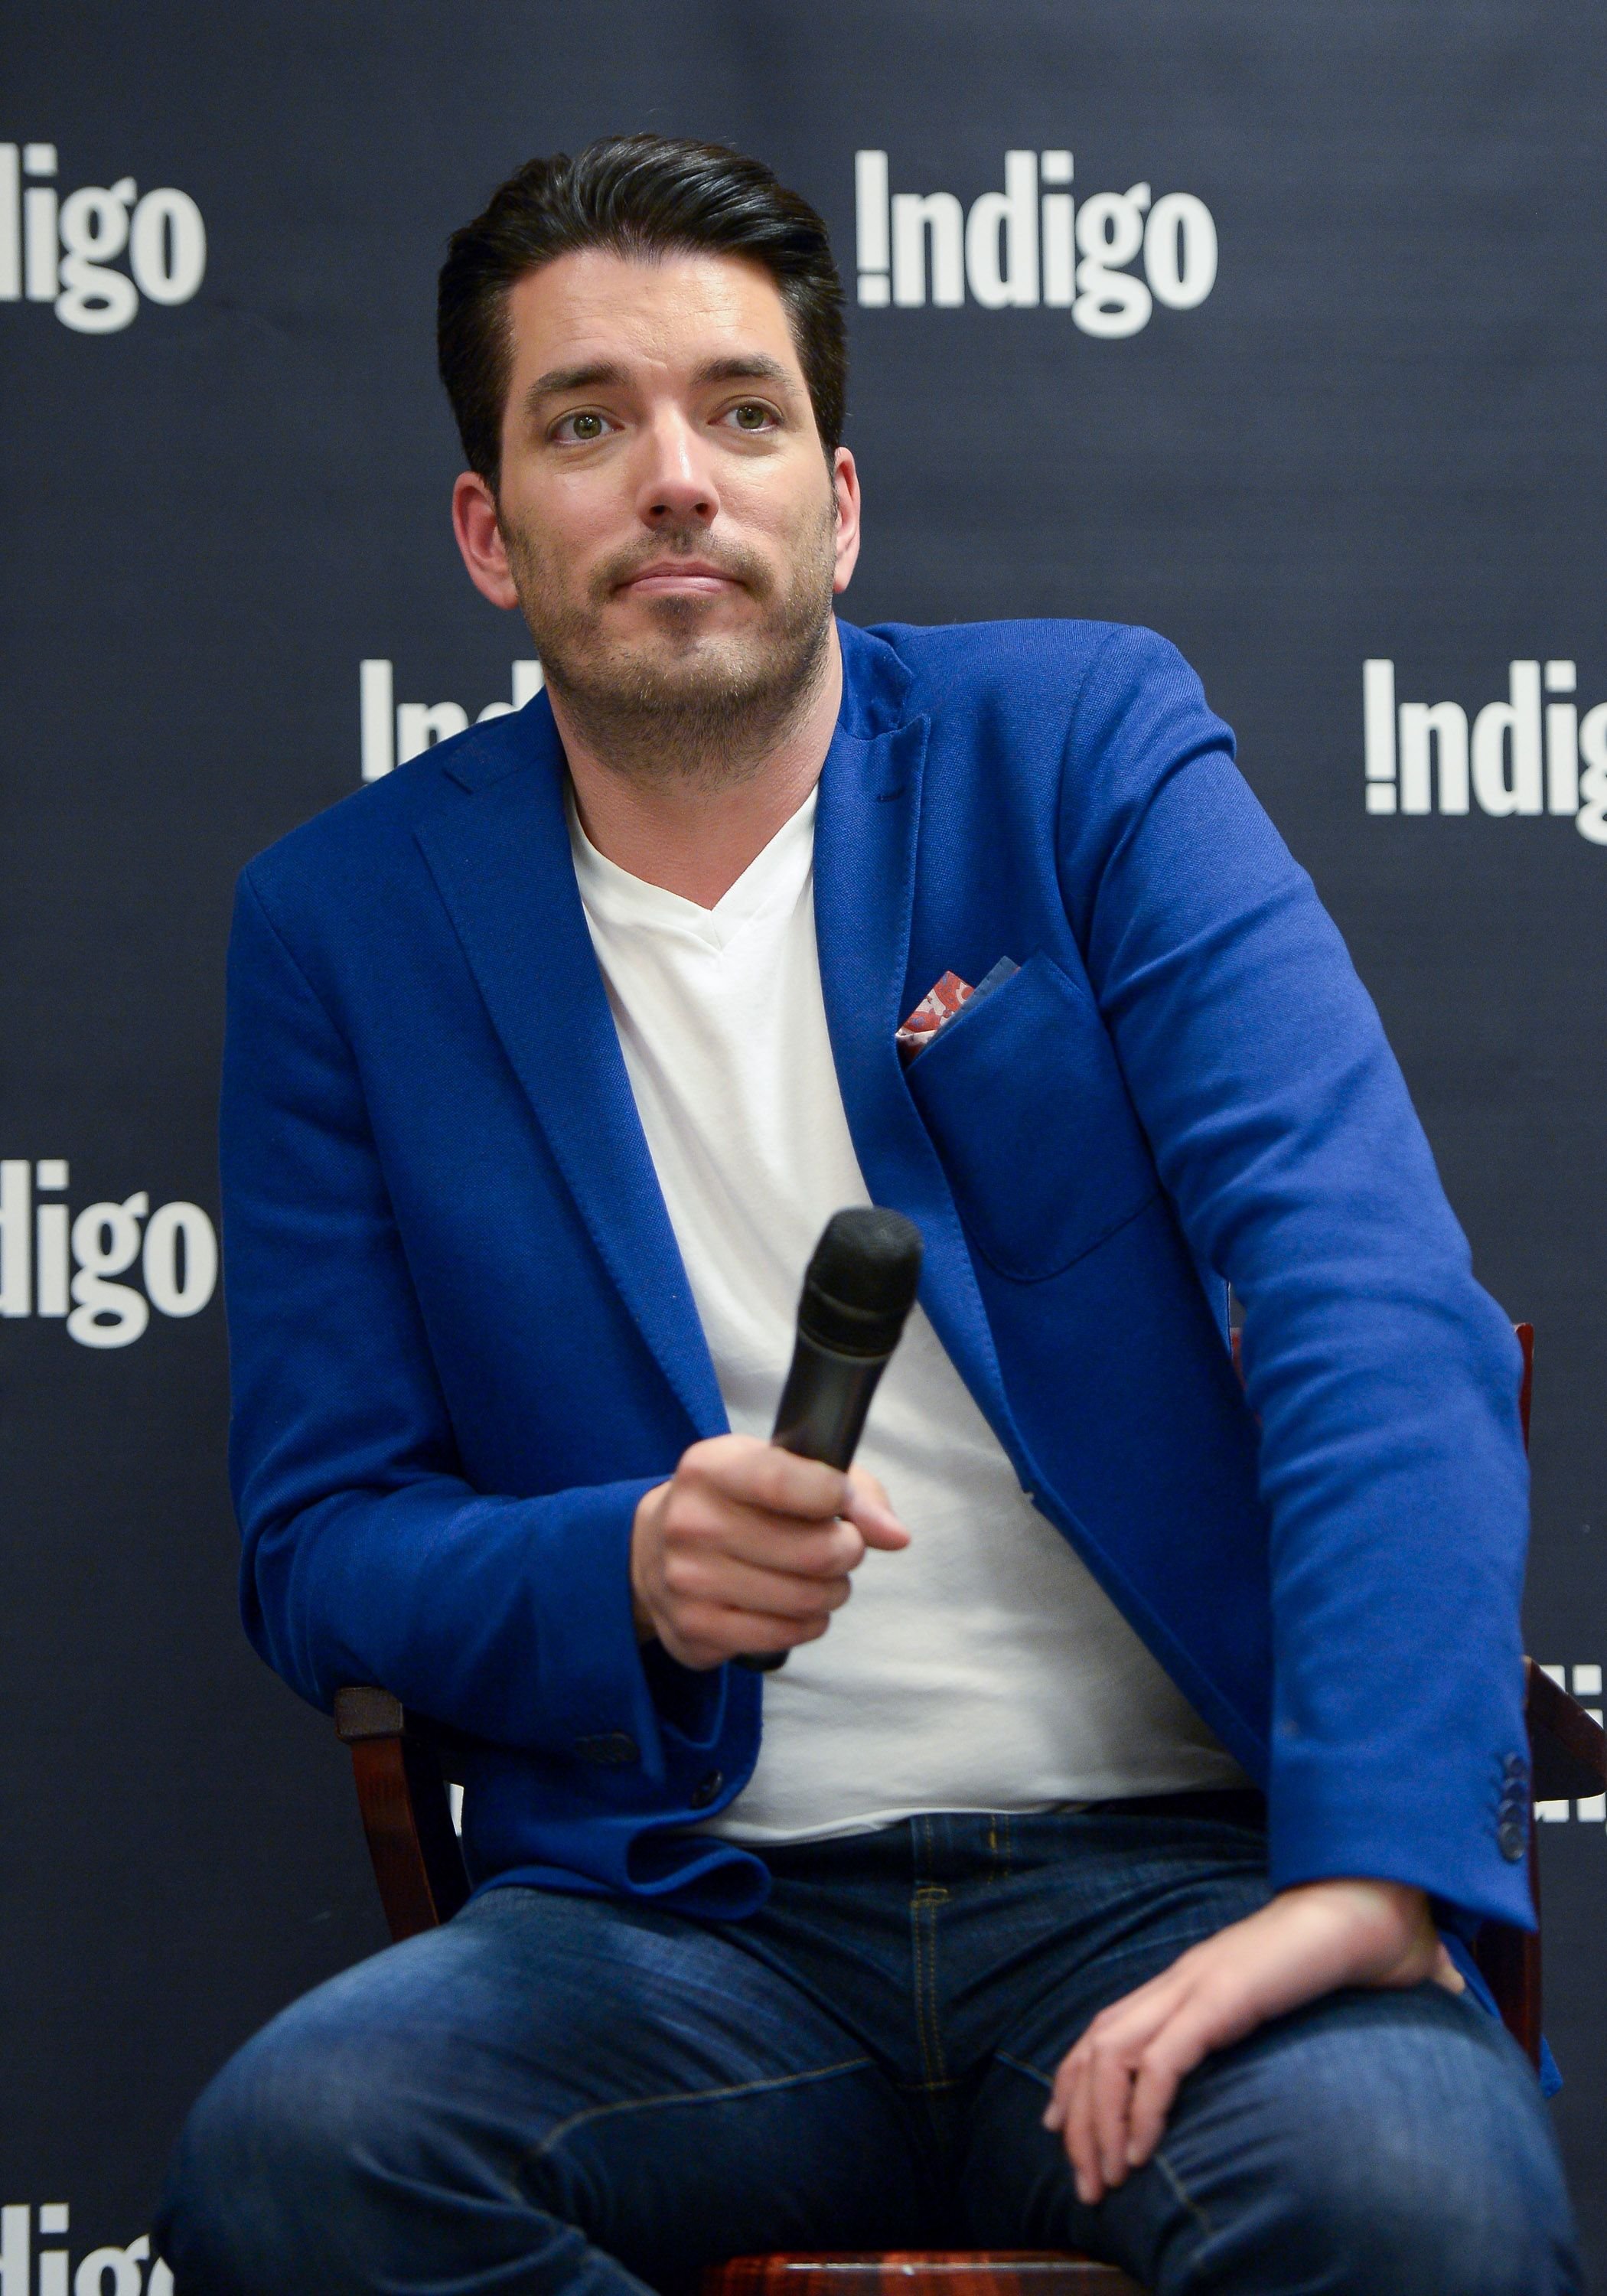 Jonathan Scott at the launch of his new book "Dream Home" at Indigo Manulife Centre on April 15, 2016, in Toronto, Canada | Photo: GP Images/WireImage/Getty Images